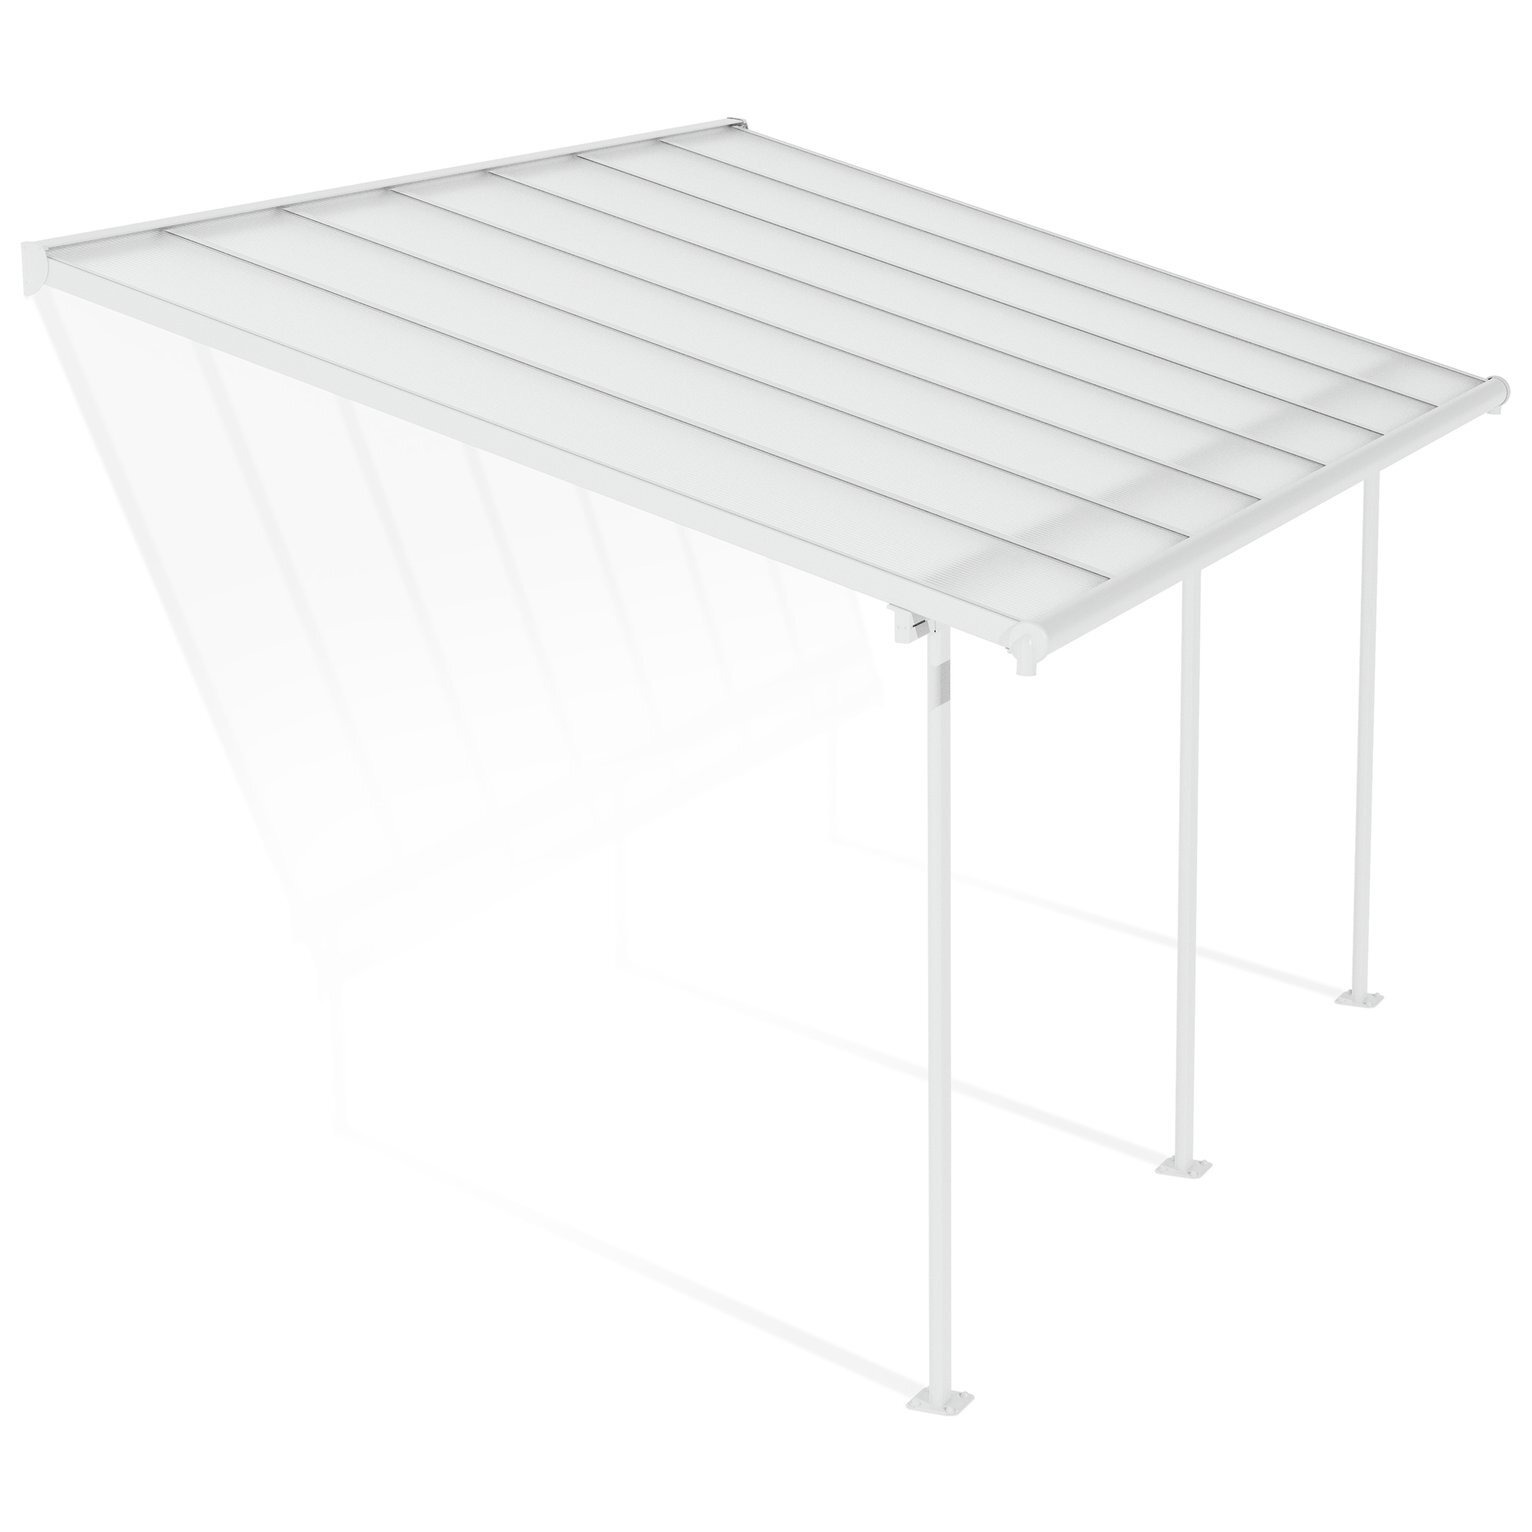 Palram - Canopia Sierra 3 x 4.25m Patio Cover - White Clear - image 1